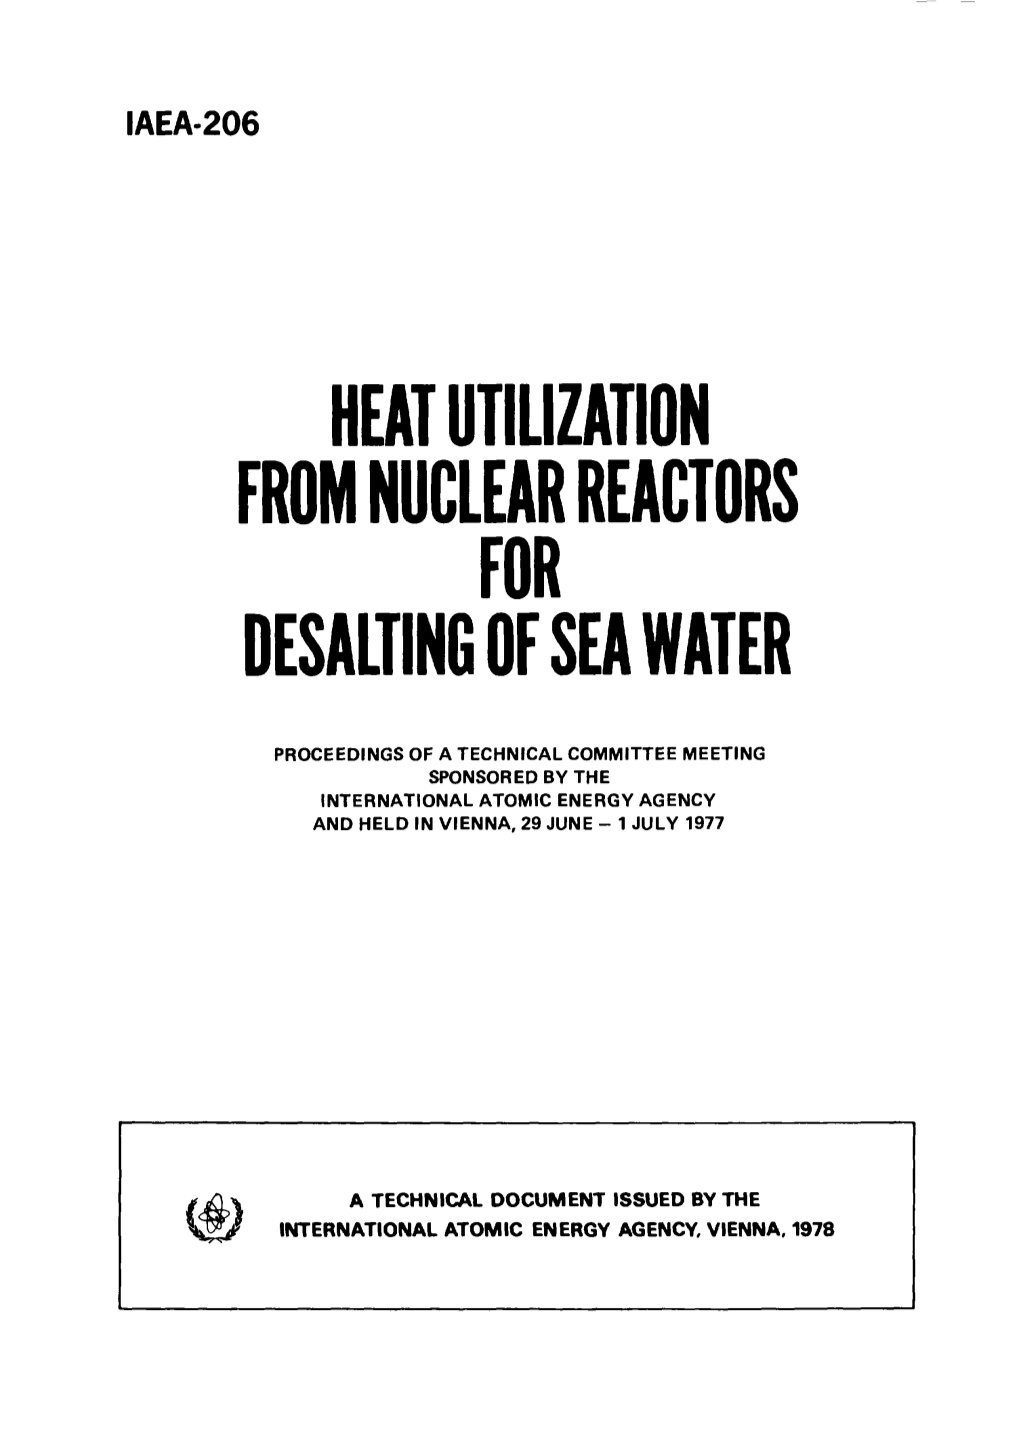 Heat Utilization from Nuclear Reactors for Desalting of Sea Water